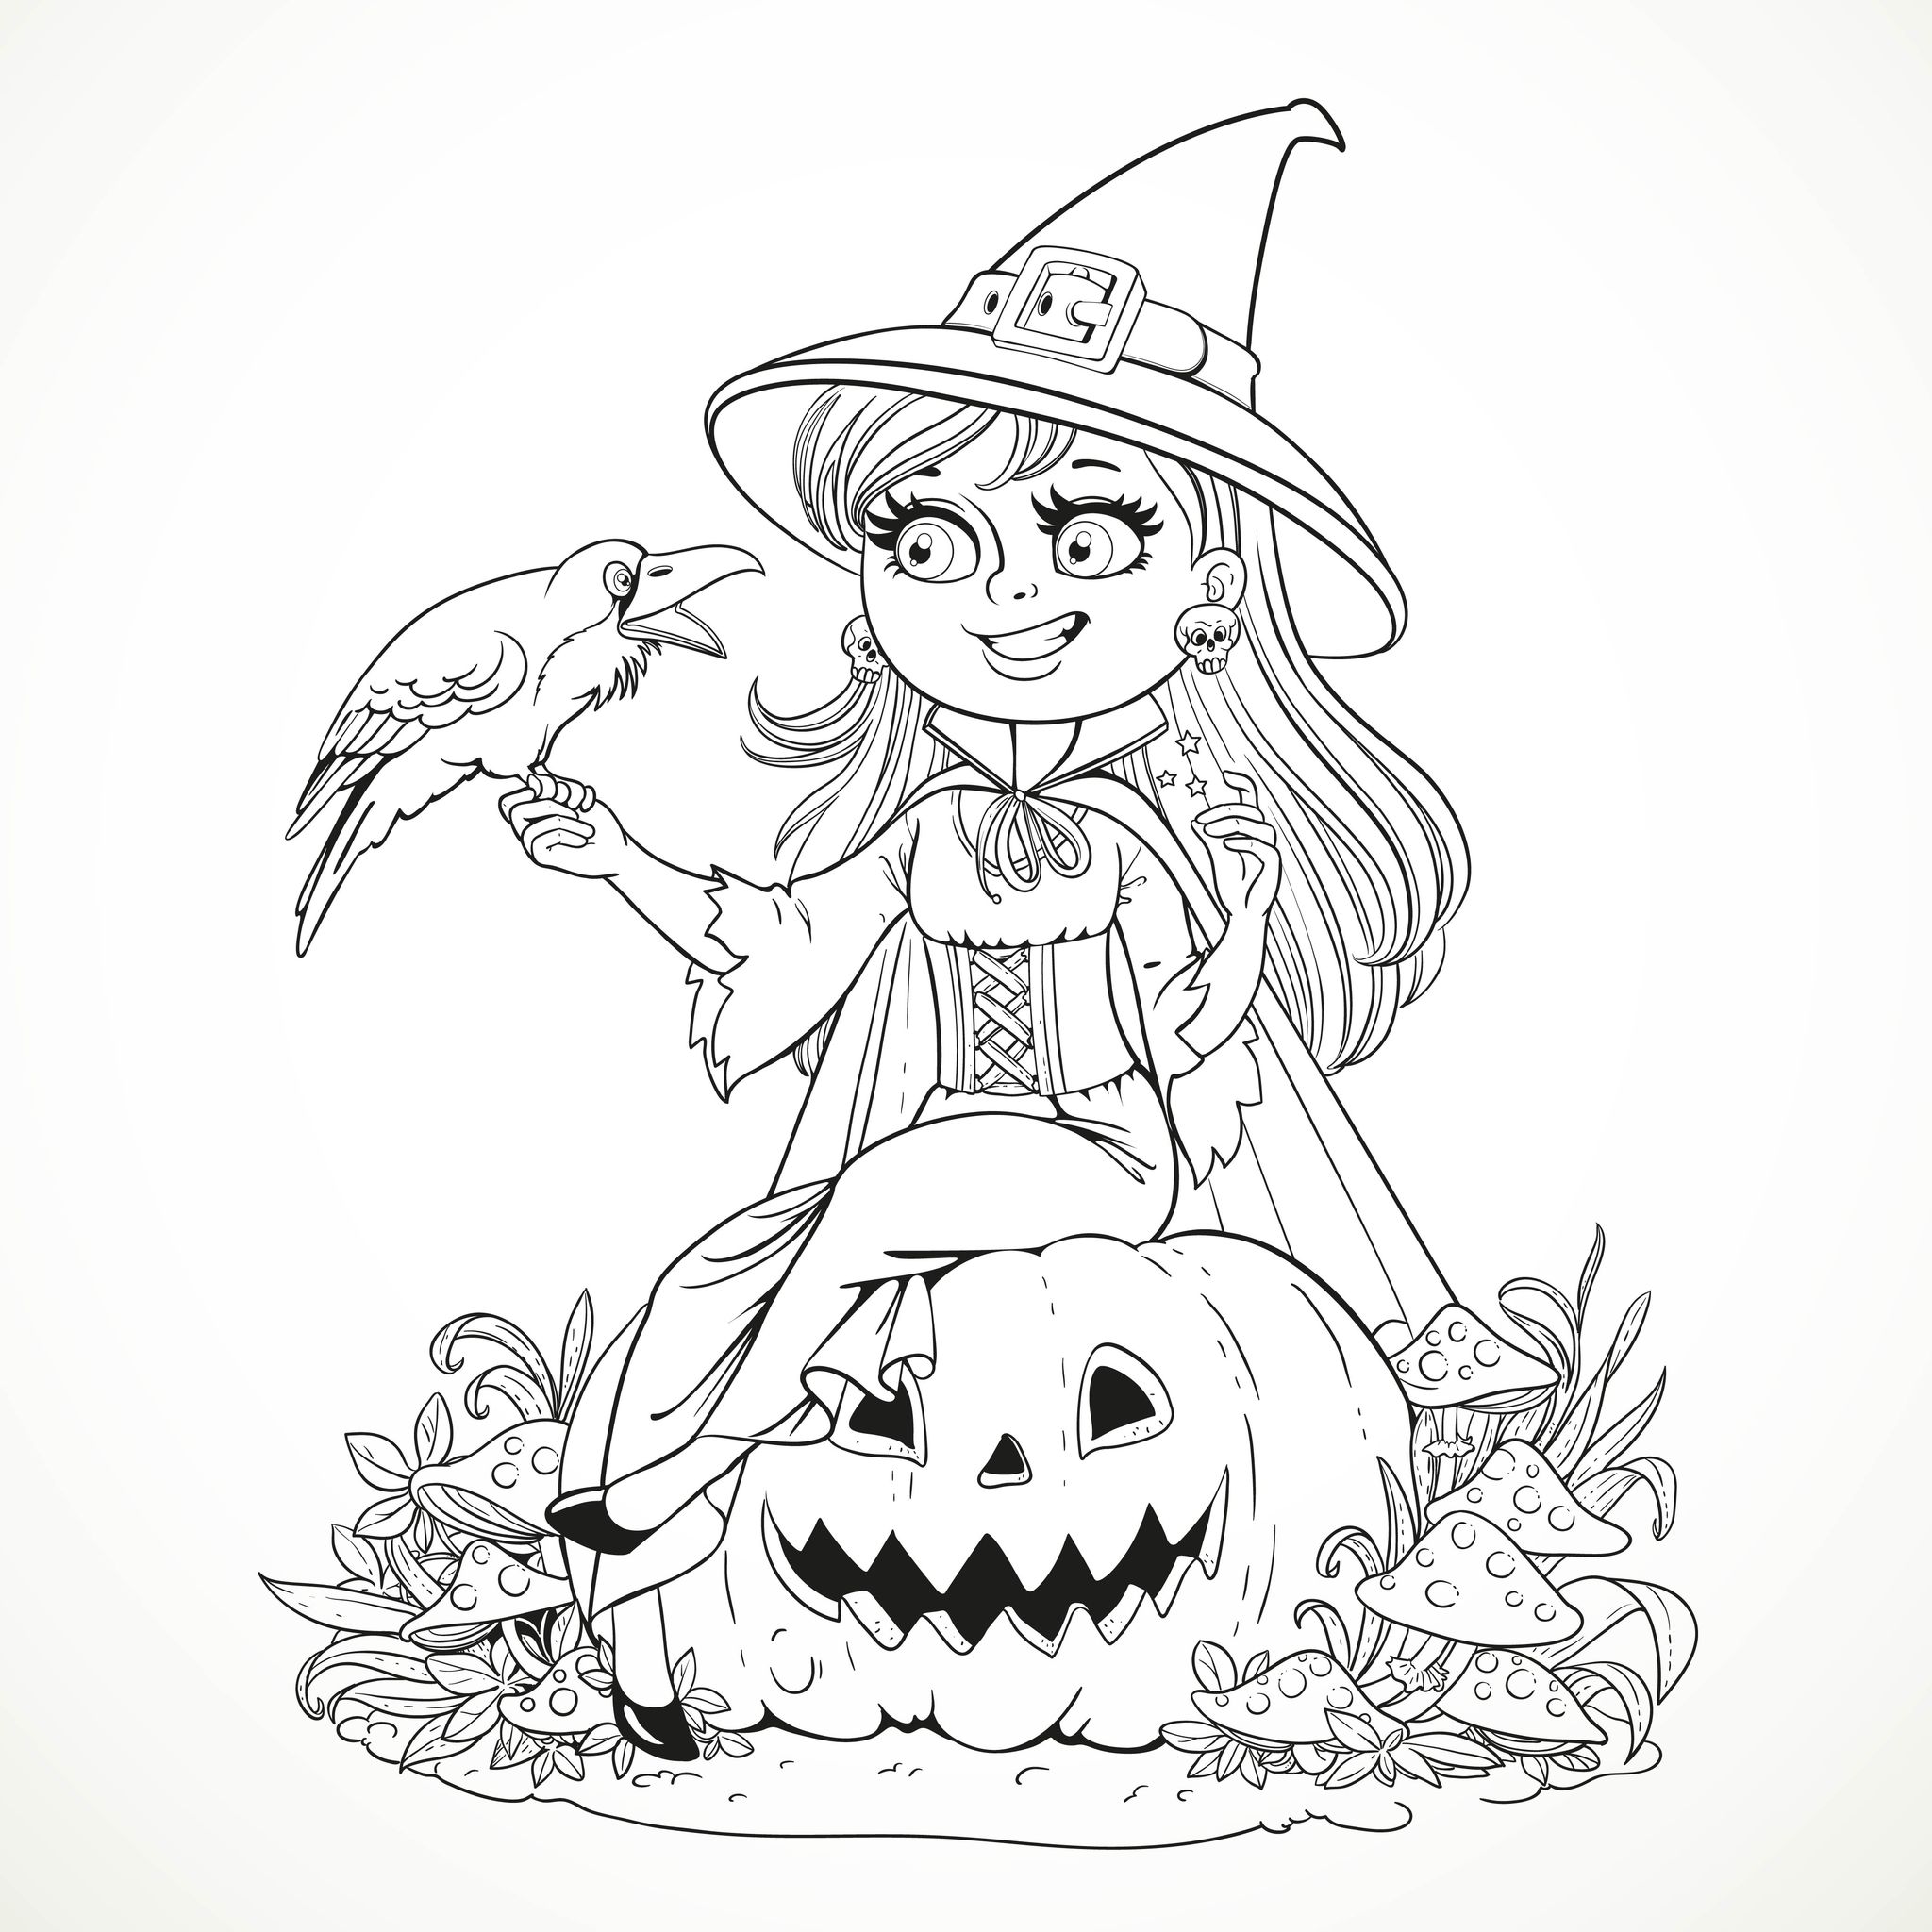 56167982 - beautiful witch sitting on a pumpkin and talks to the black raven outlined for coloring book isolated on white background